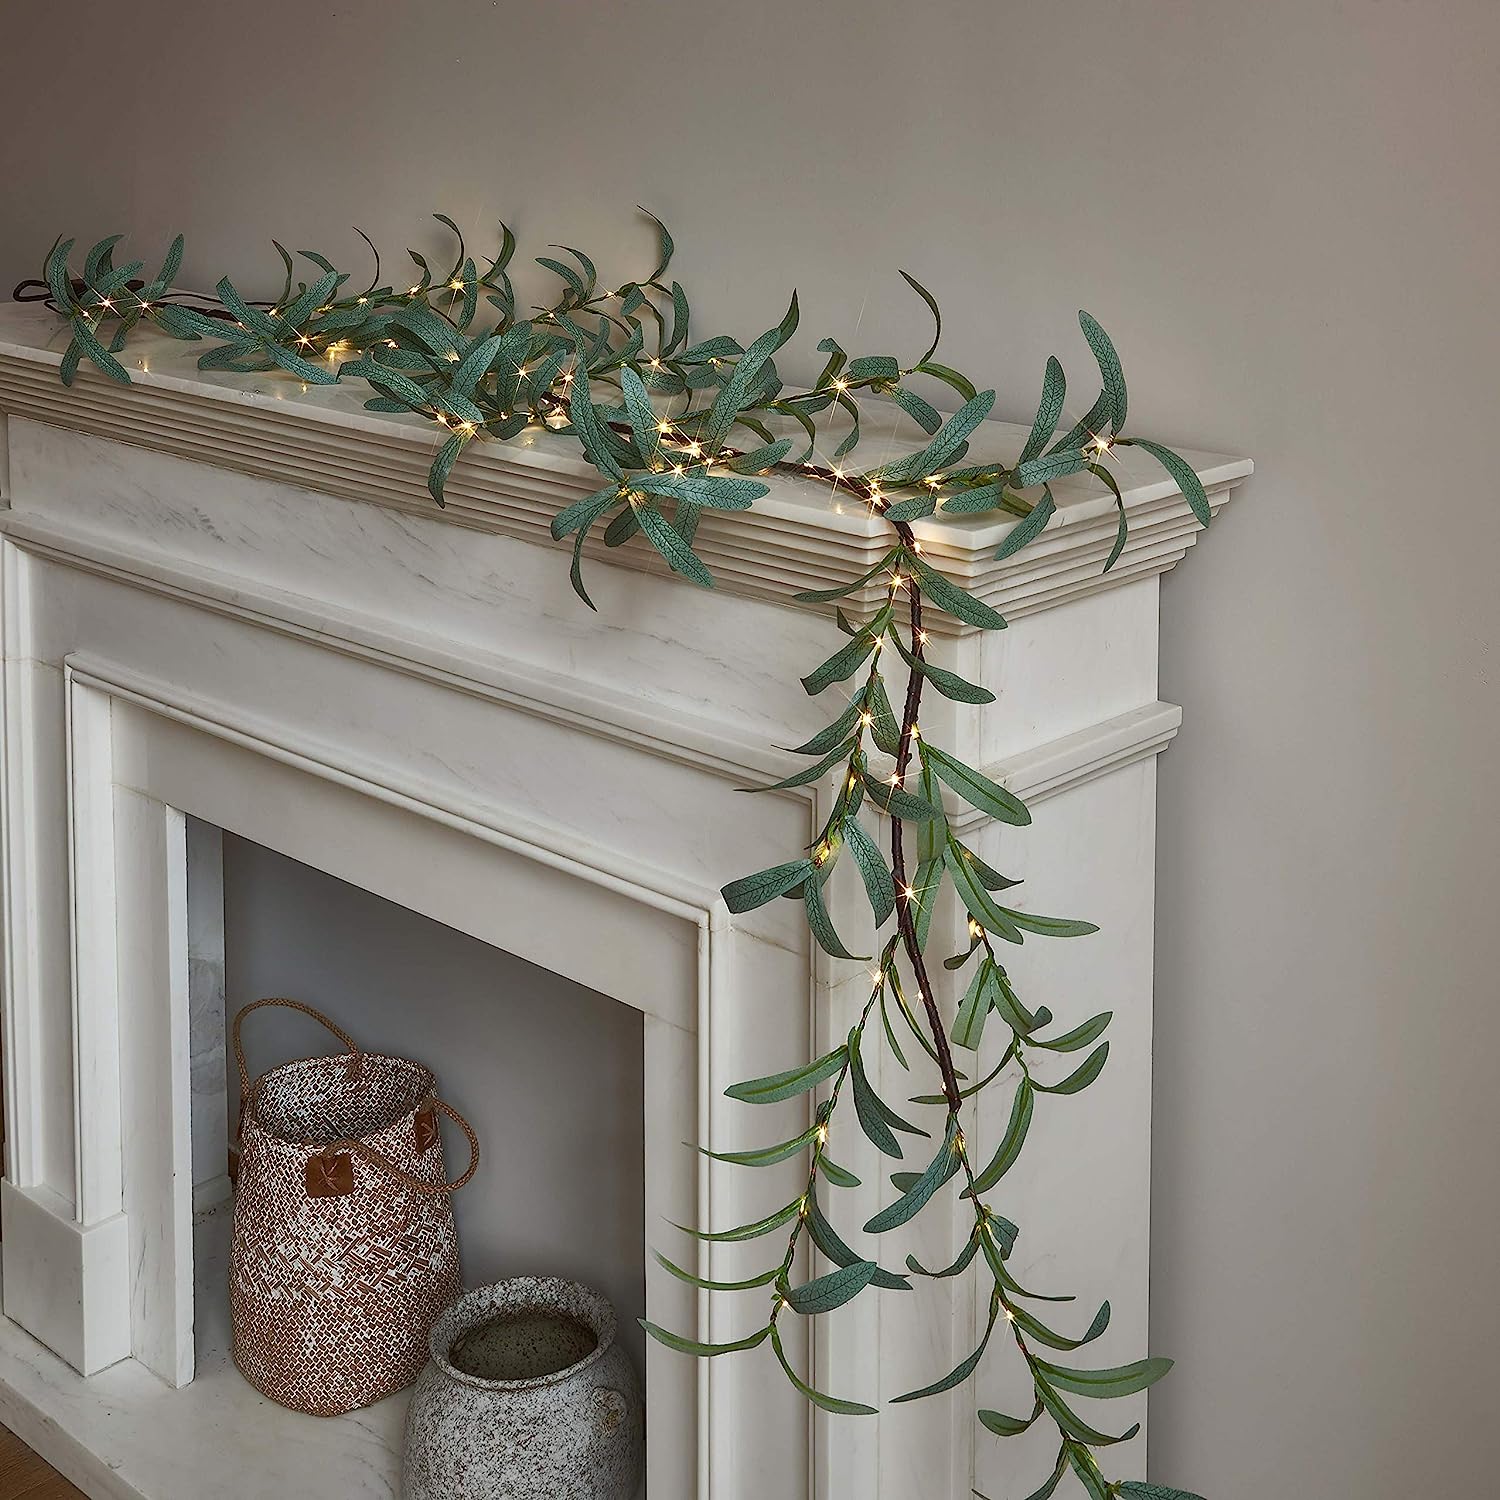 An-olive-leaf-string-of-lights-decorates-a-white-fireplace-mantel.